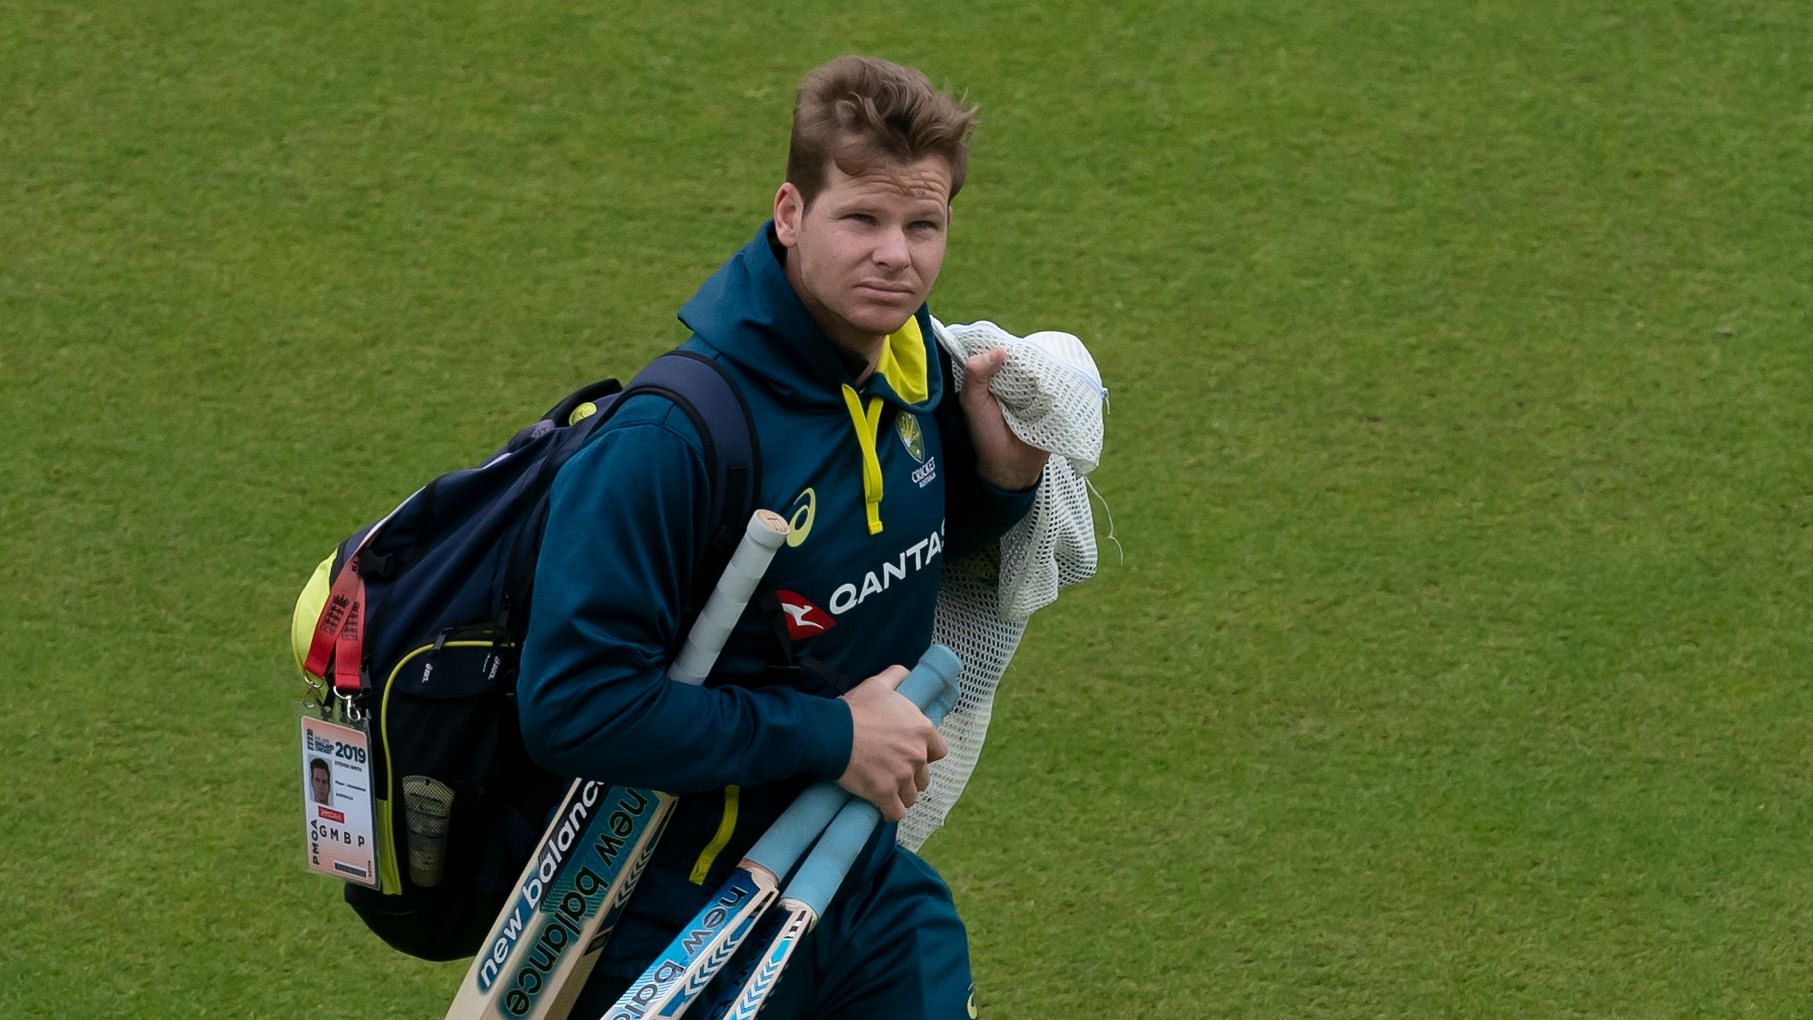 Steve Smith’s return, after recovering from the effects of a concussion, and the dropping of Usman Khawaja will bring about a change in Australia’s batting lineup.